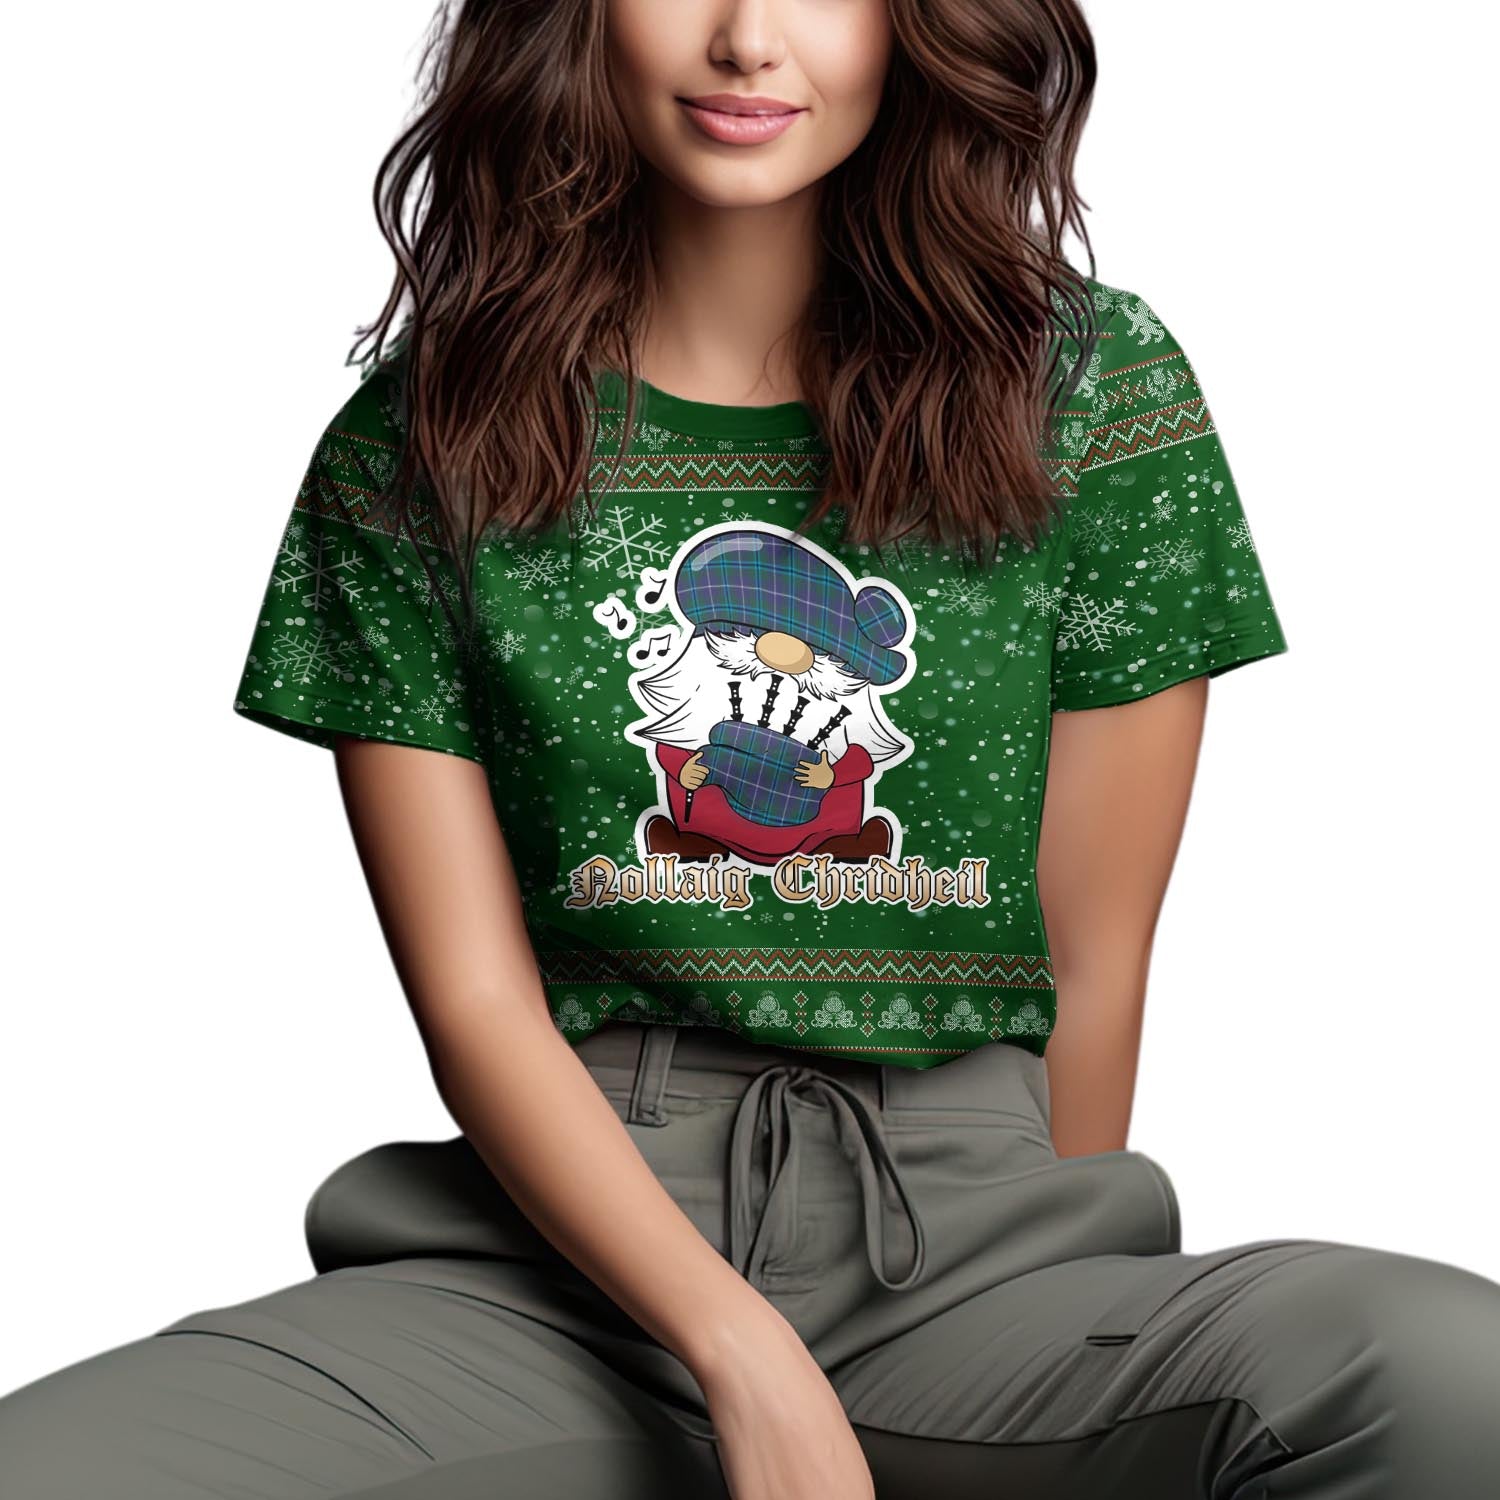 Sandilands Clan Christmas Family T-Shirt with Funny Gnome Playing Bagpipes Women's Shirt Green - Tartanvibesclothing